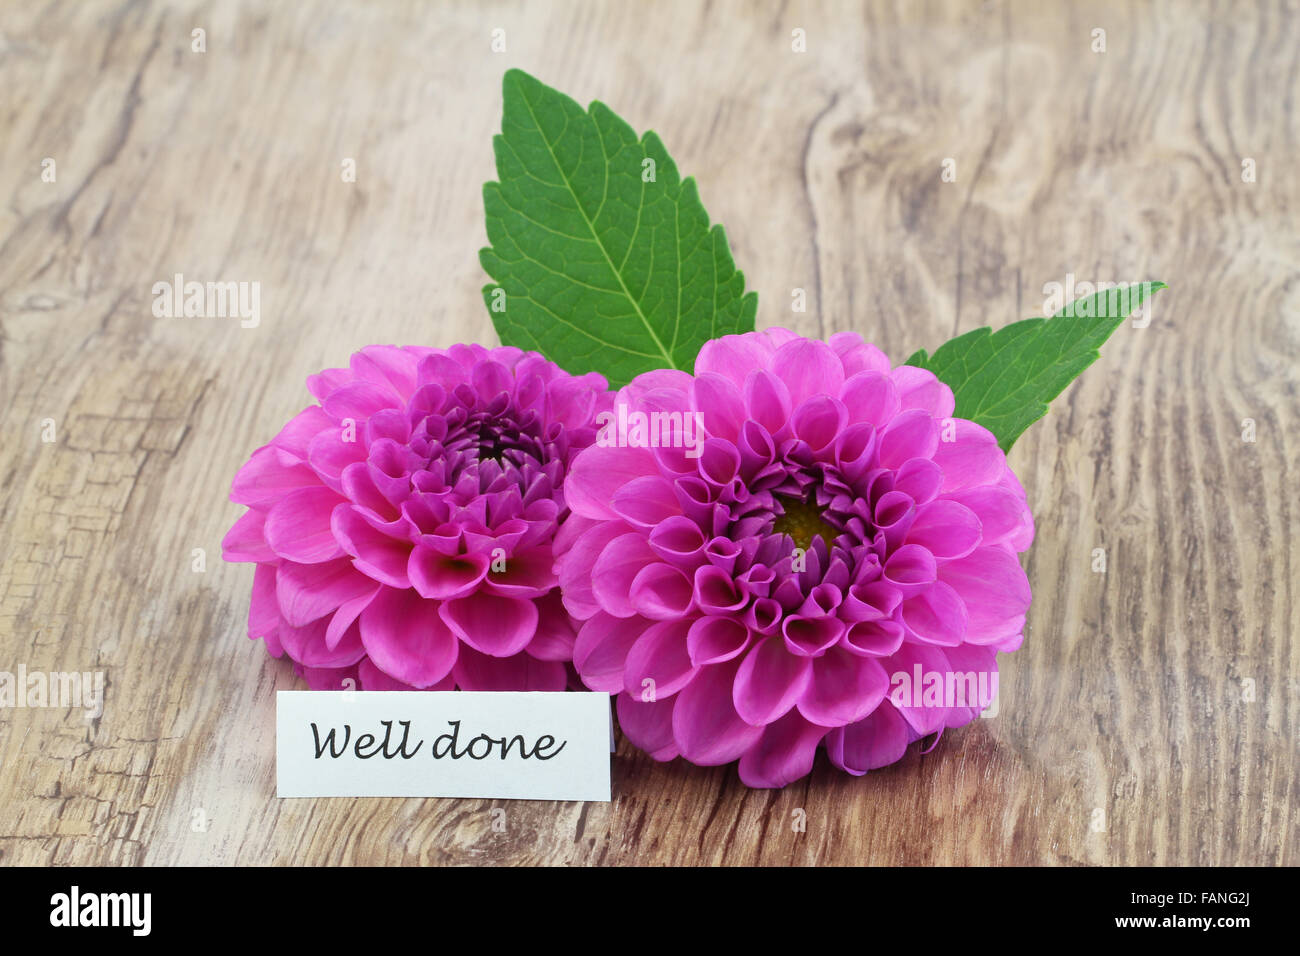 Well done card with pink dahlia flowers Stock Photo